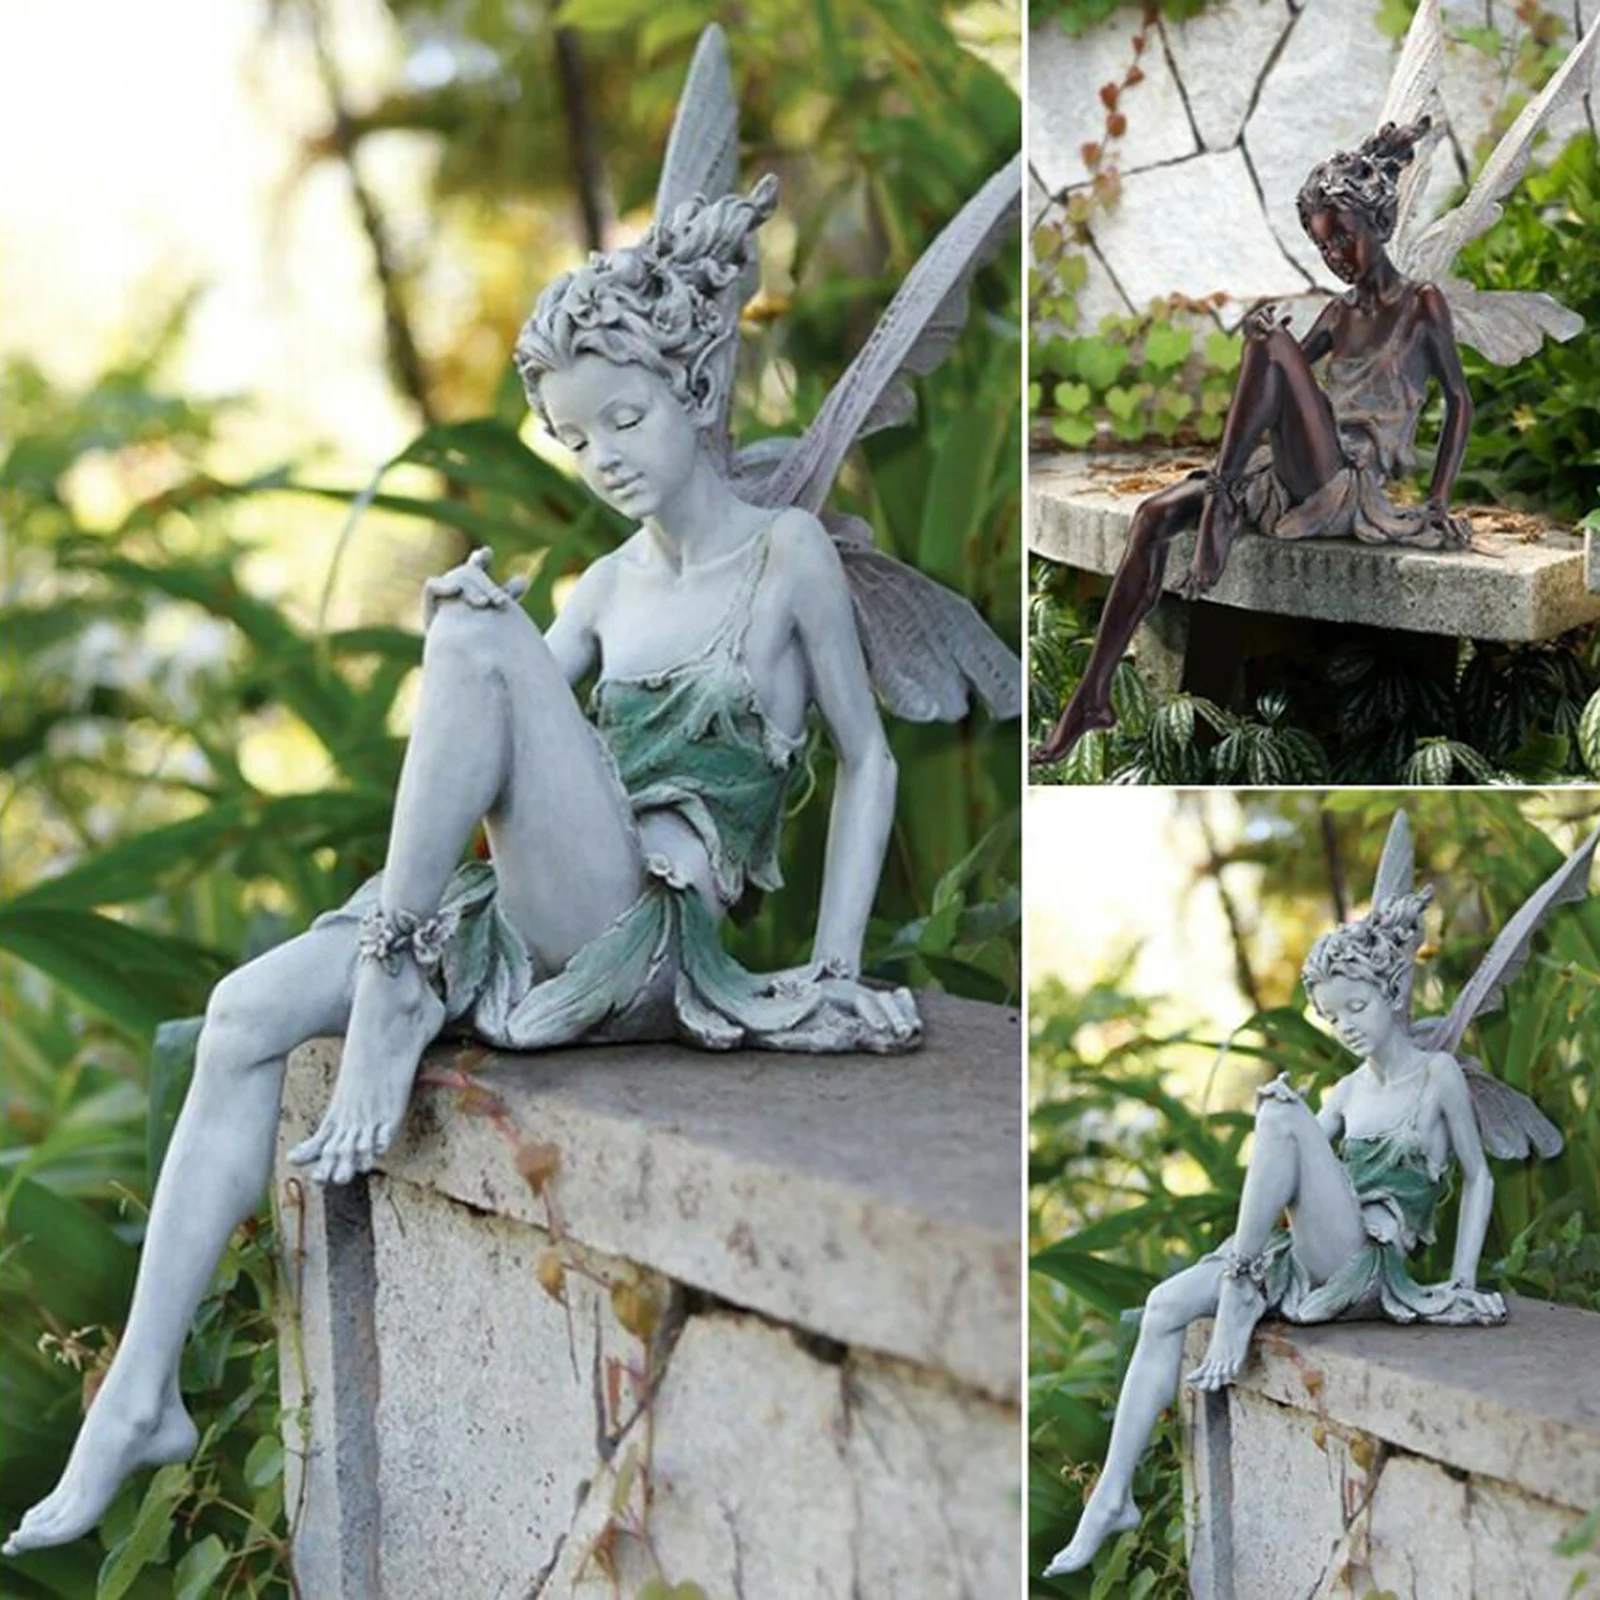 Flower Fairy Statue Sitting Art Sculpture Figurines Garden Ornament Angel Wings Resin Craft Landscaping Home Decoration Outdoor